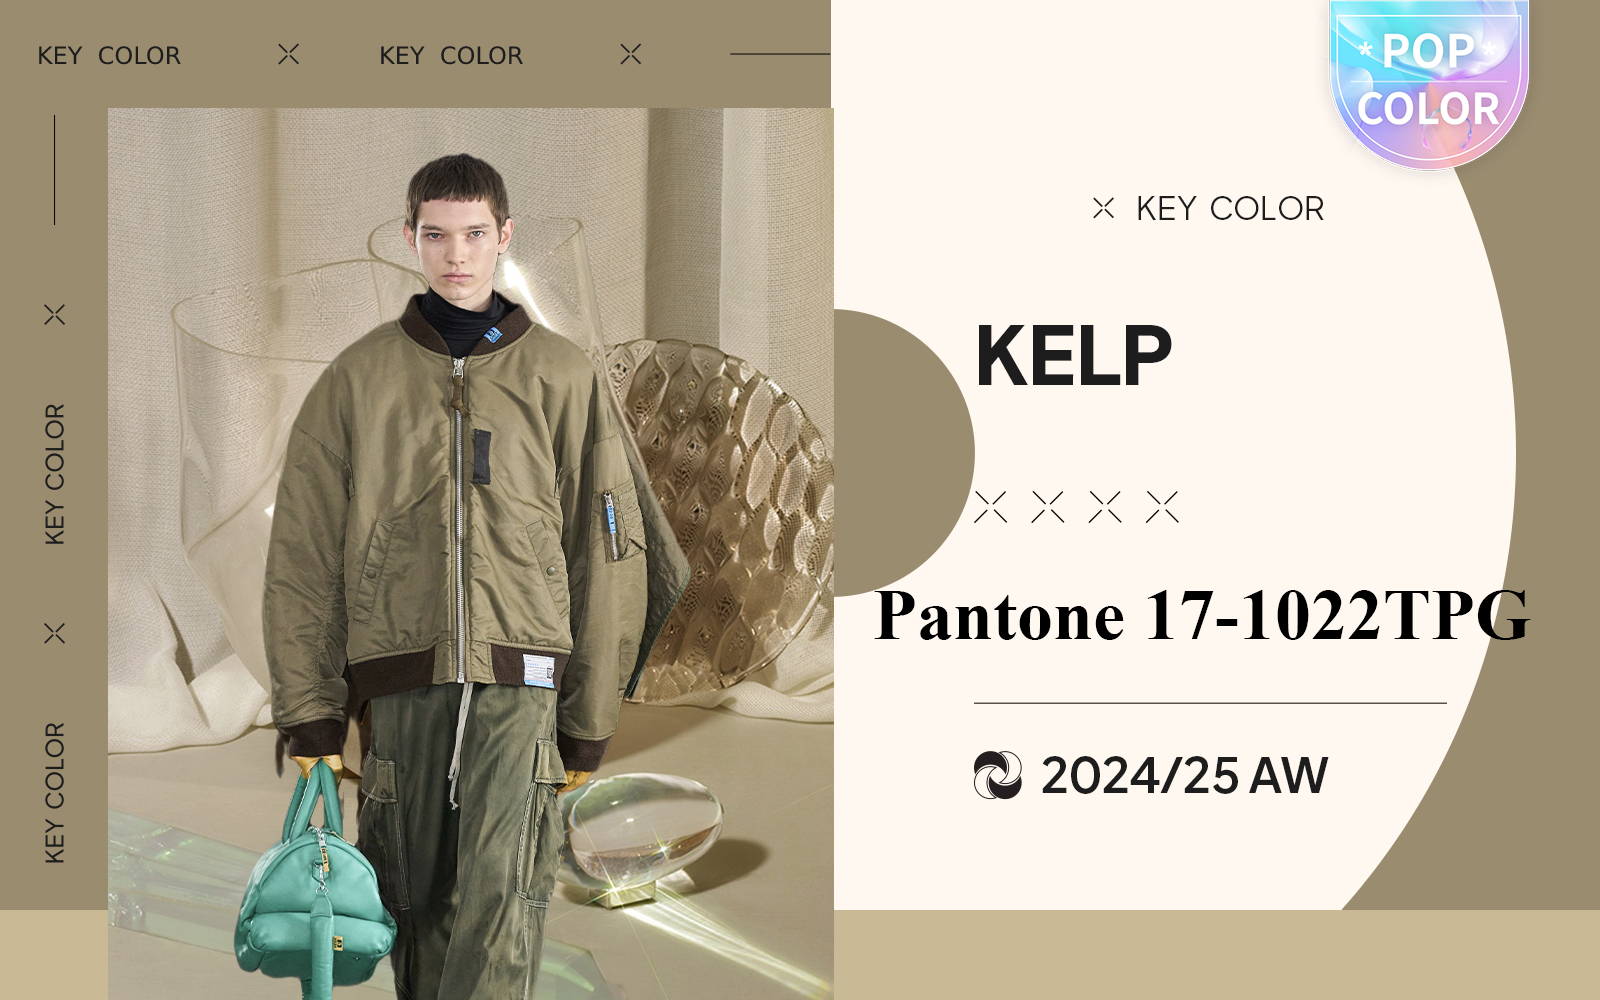 Kelp -- The Color Trend for Menswear